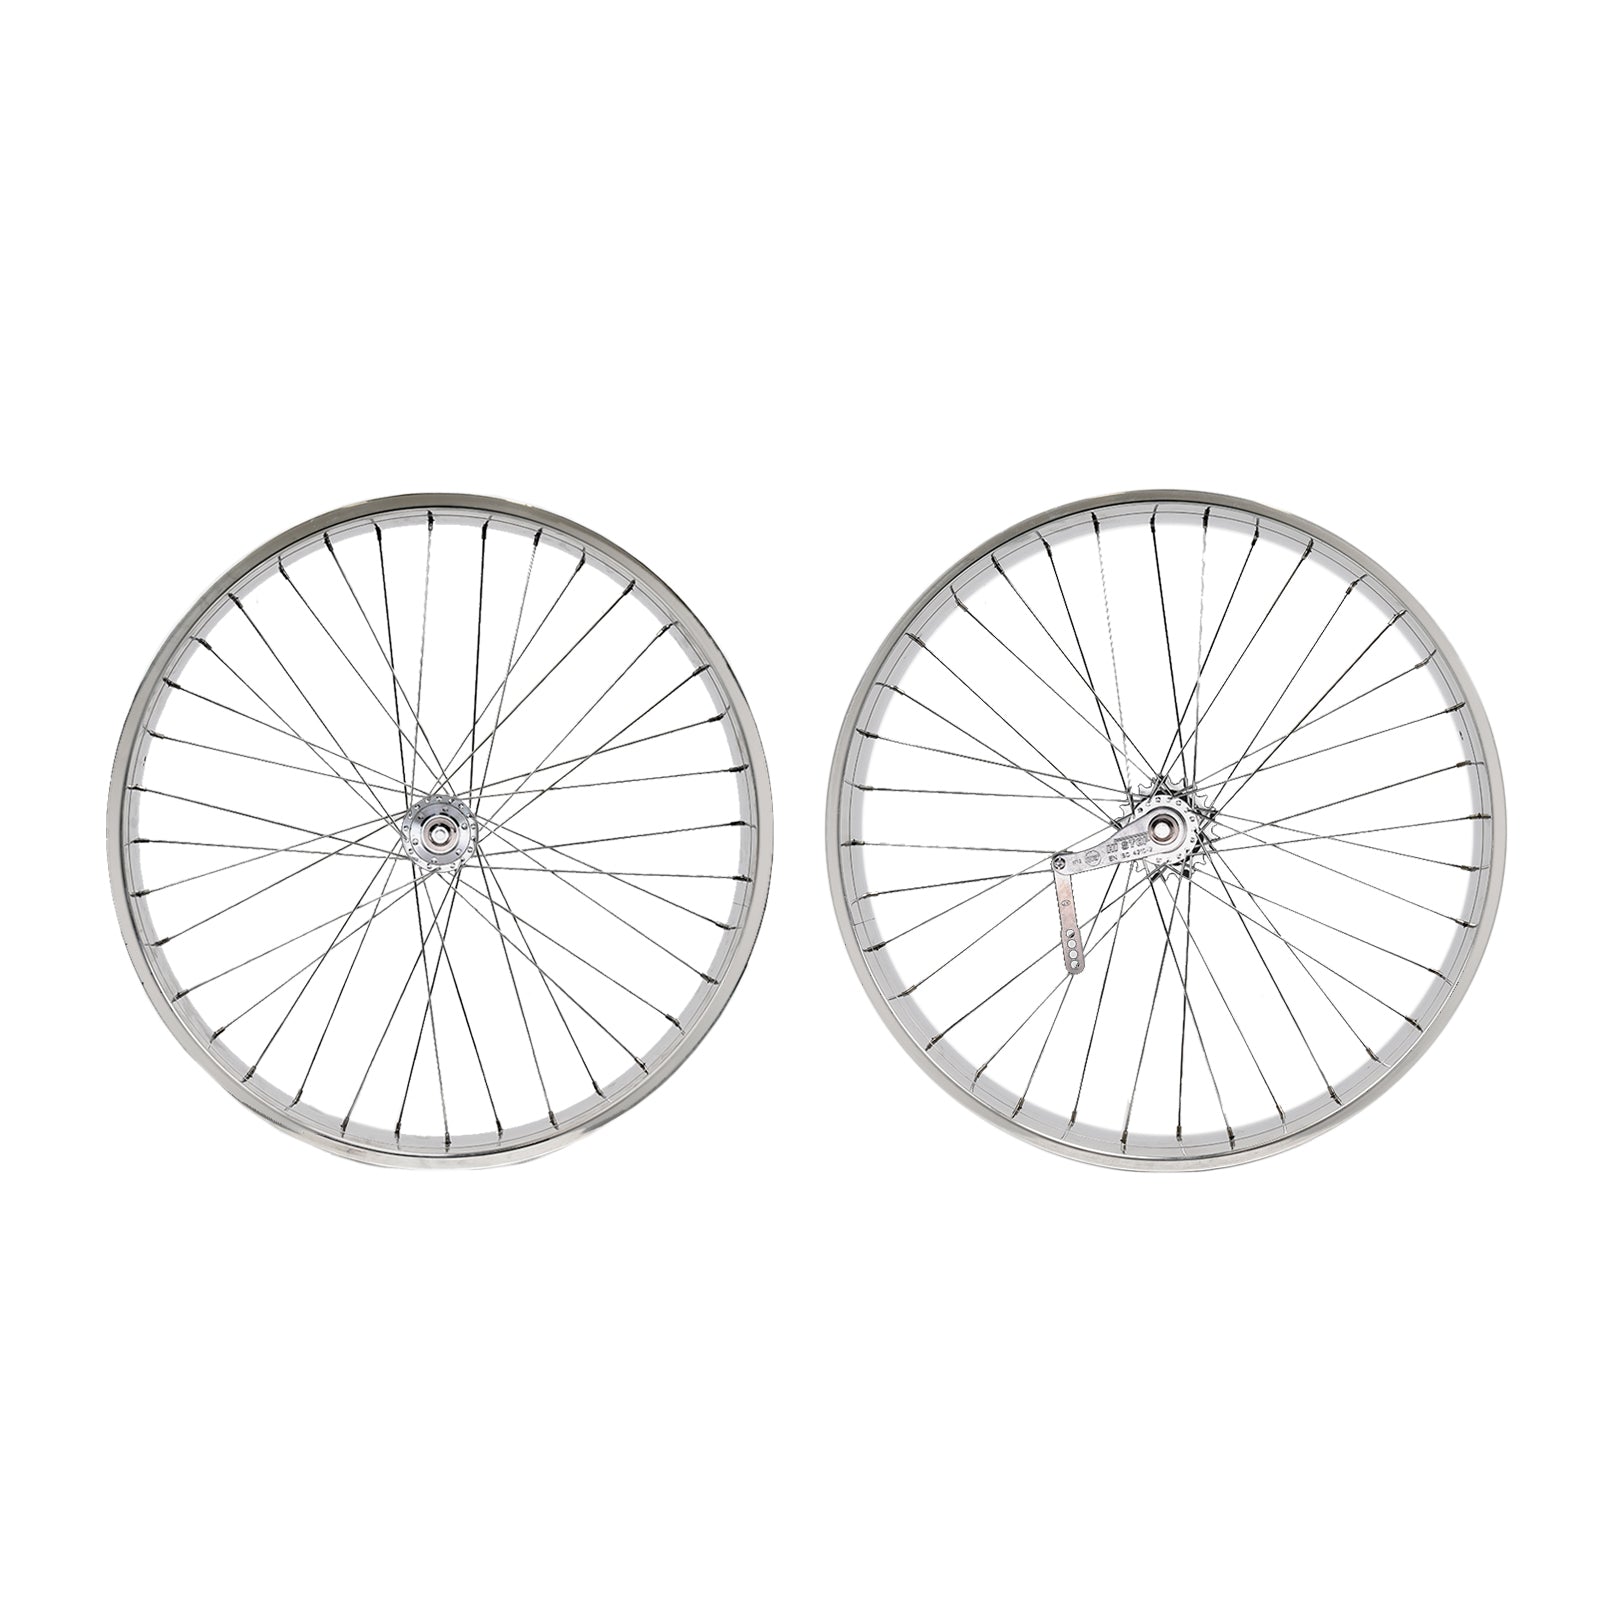 Tracer WH-D4C263613-PL Double Polished Fat Rim Wheelset with Coaster Brake.